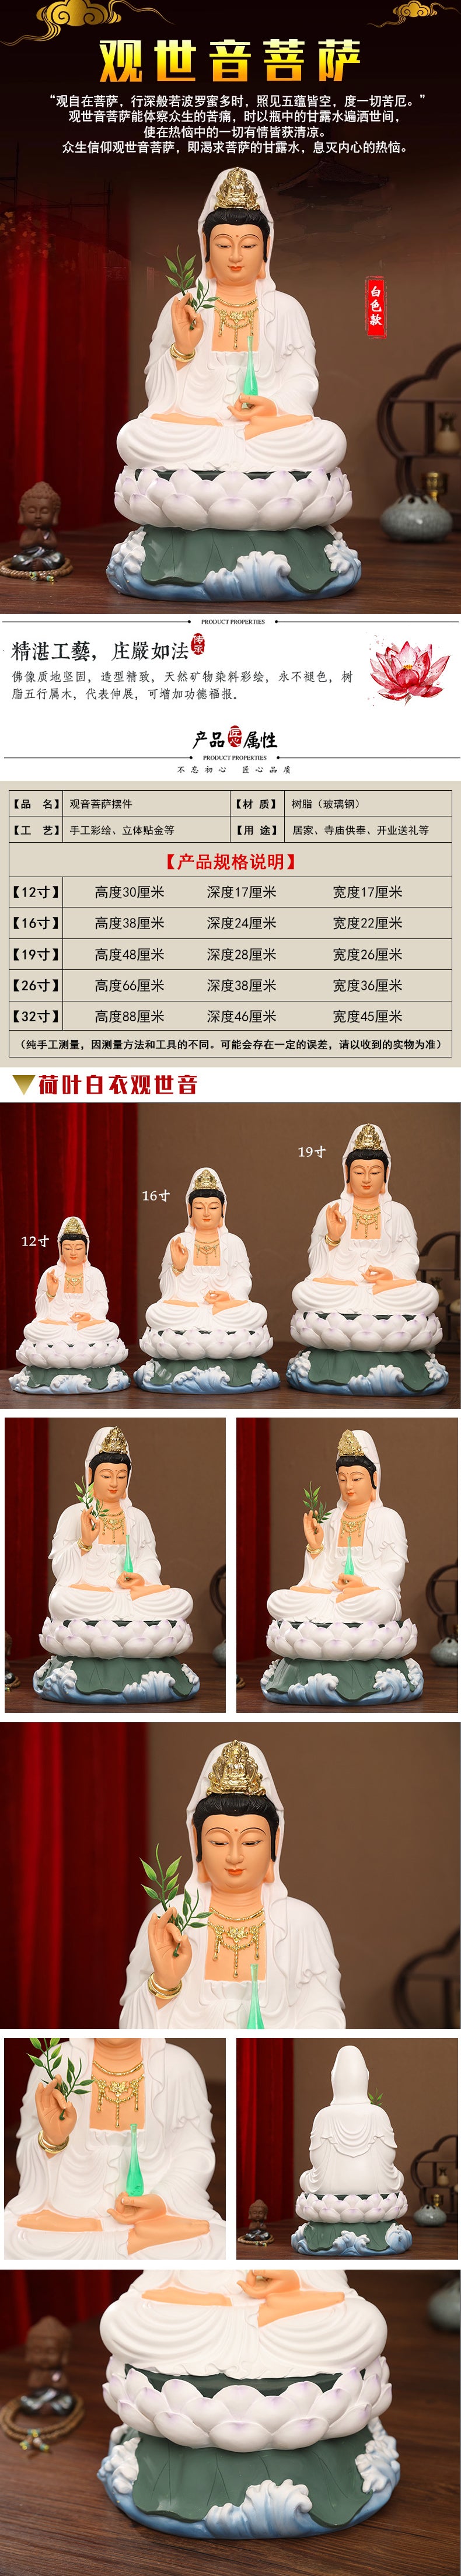 White Clothes Guanyin Bodhisattva Buddha Statue of South China Sea for Sale, Lotus Leaf Resin Material